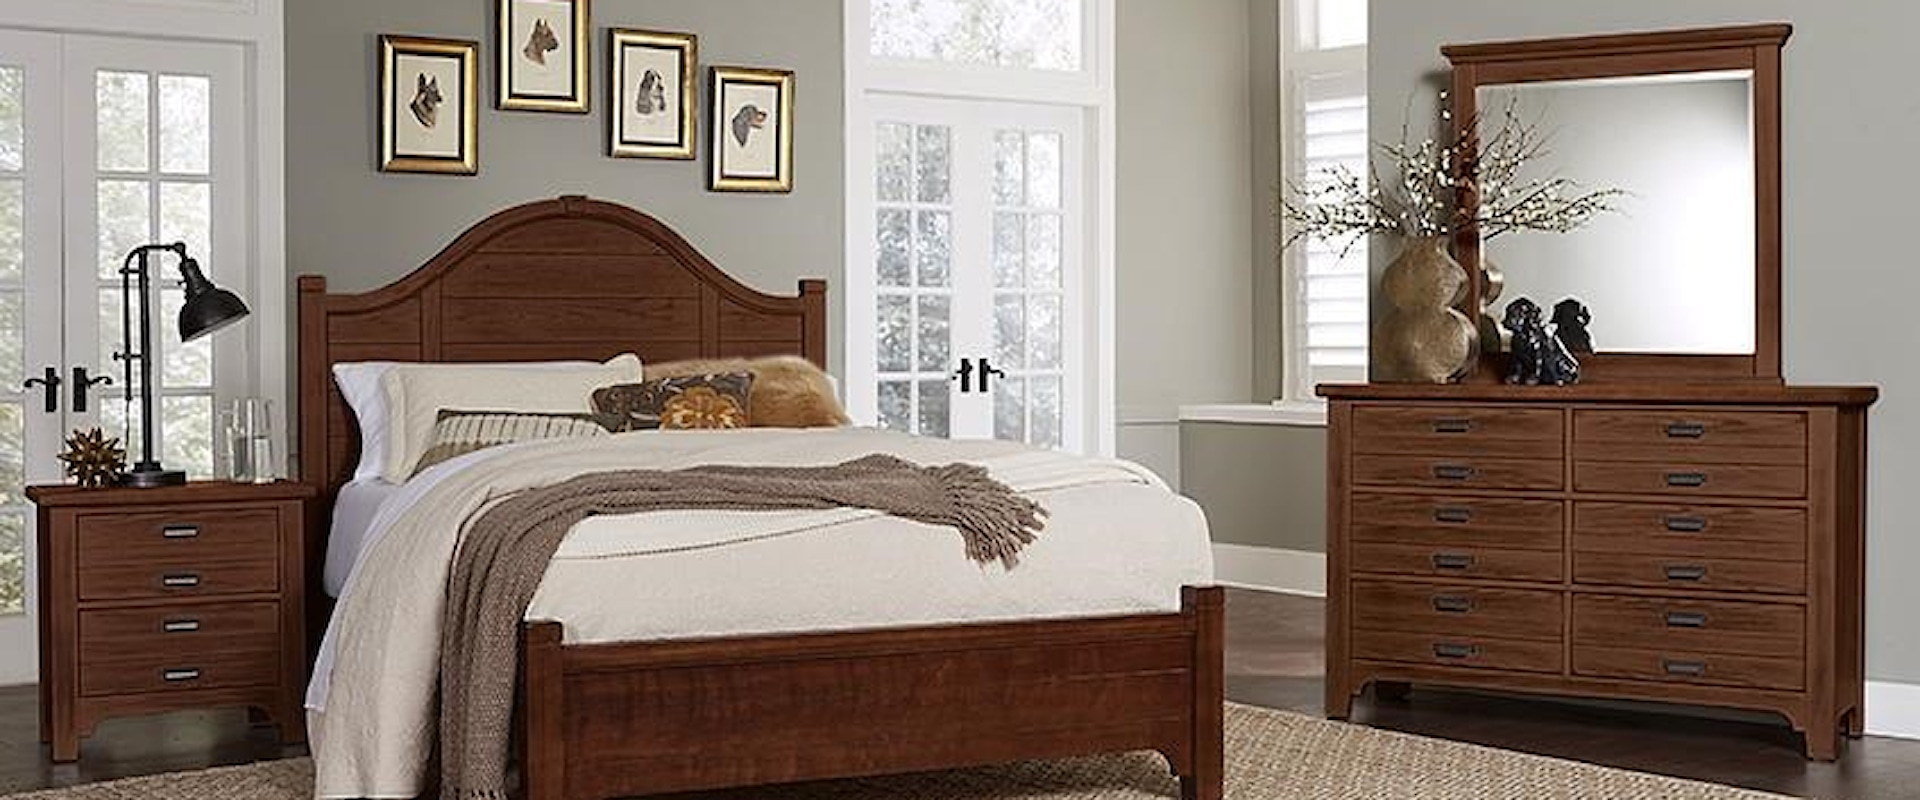 King Arch Bed, Double Dresser, Landscape Mirror, 2 Drawer Nightstand